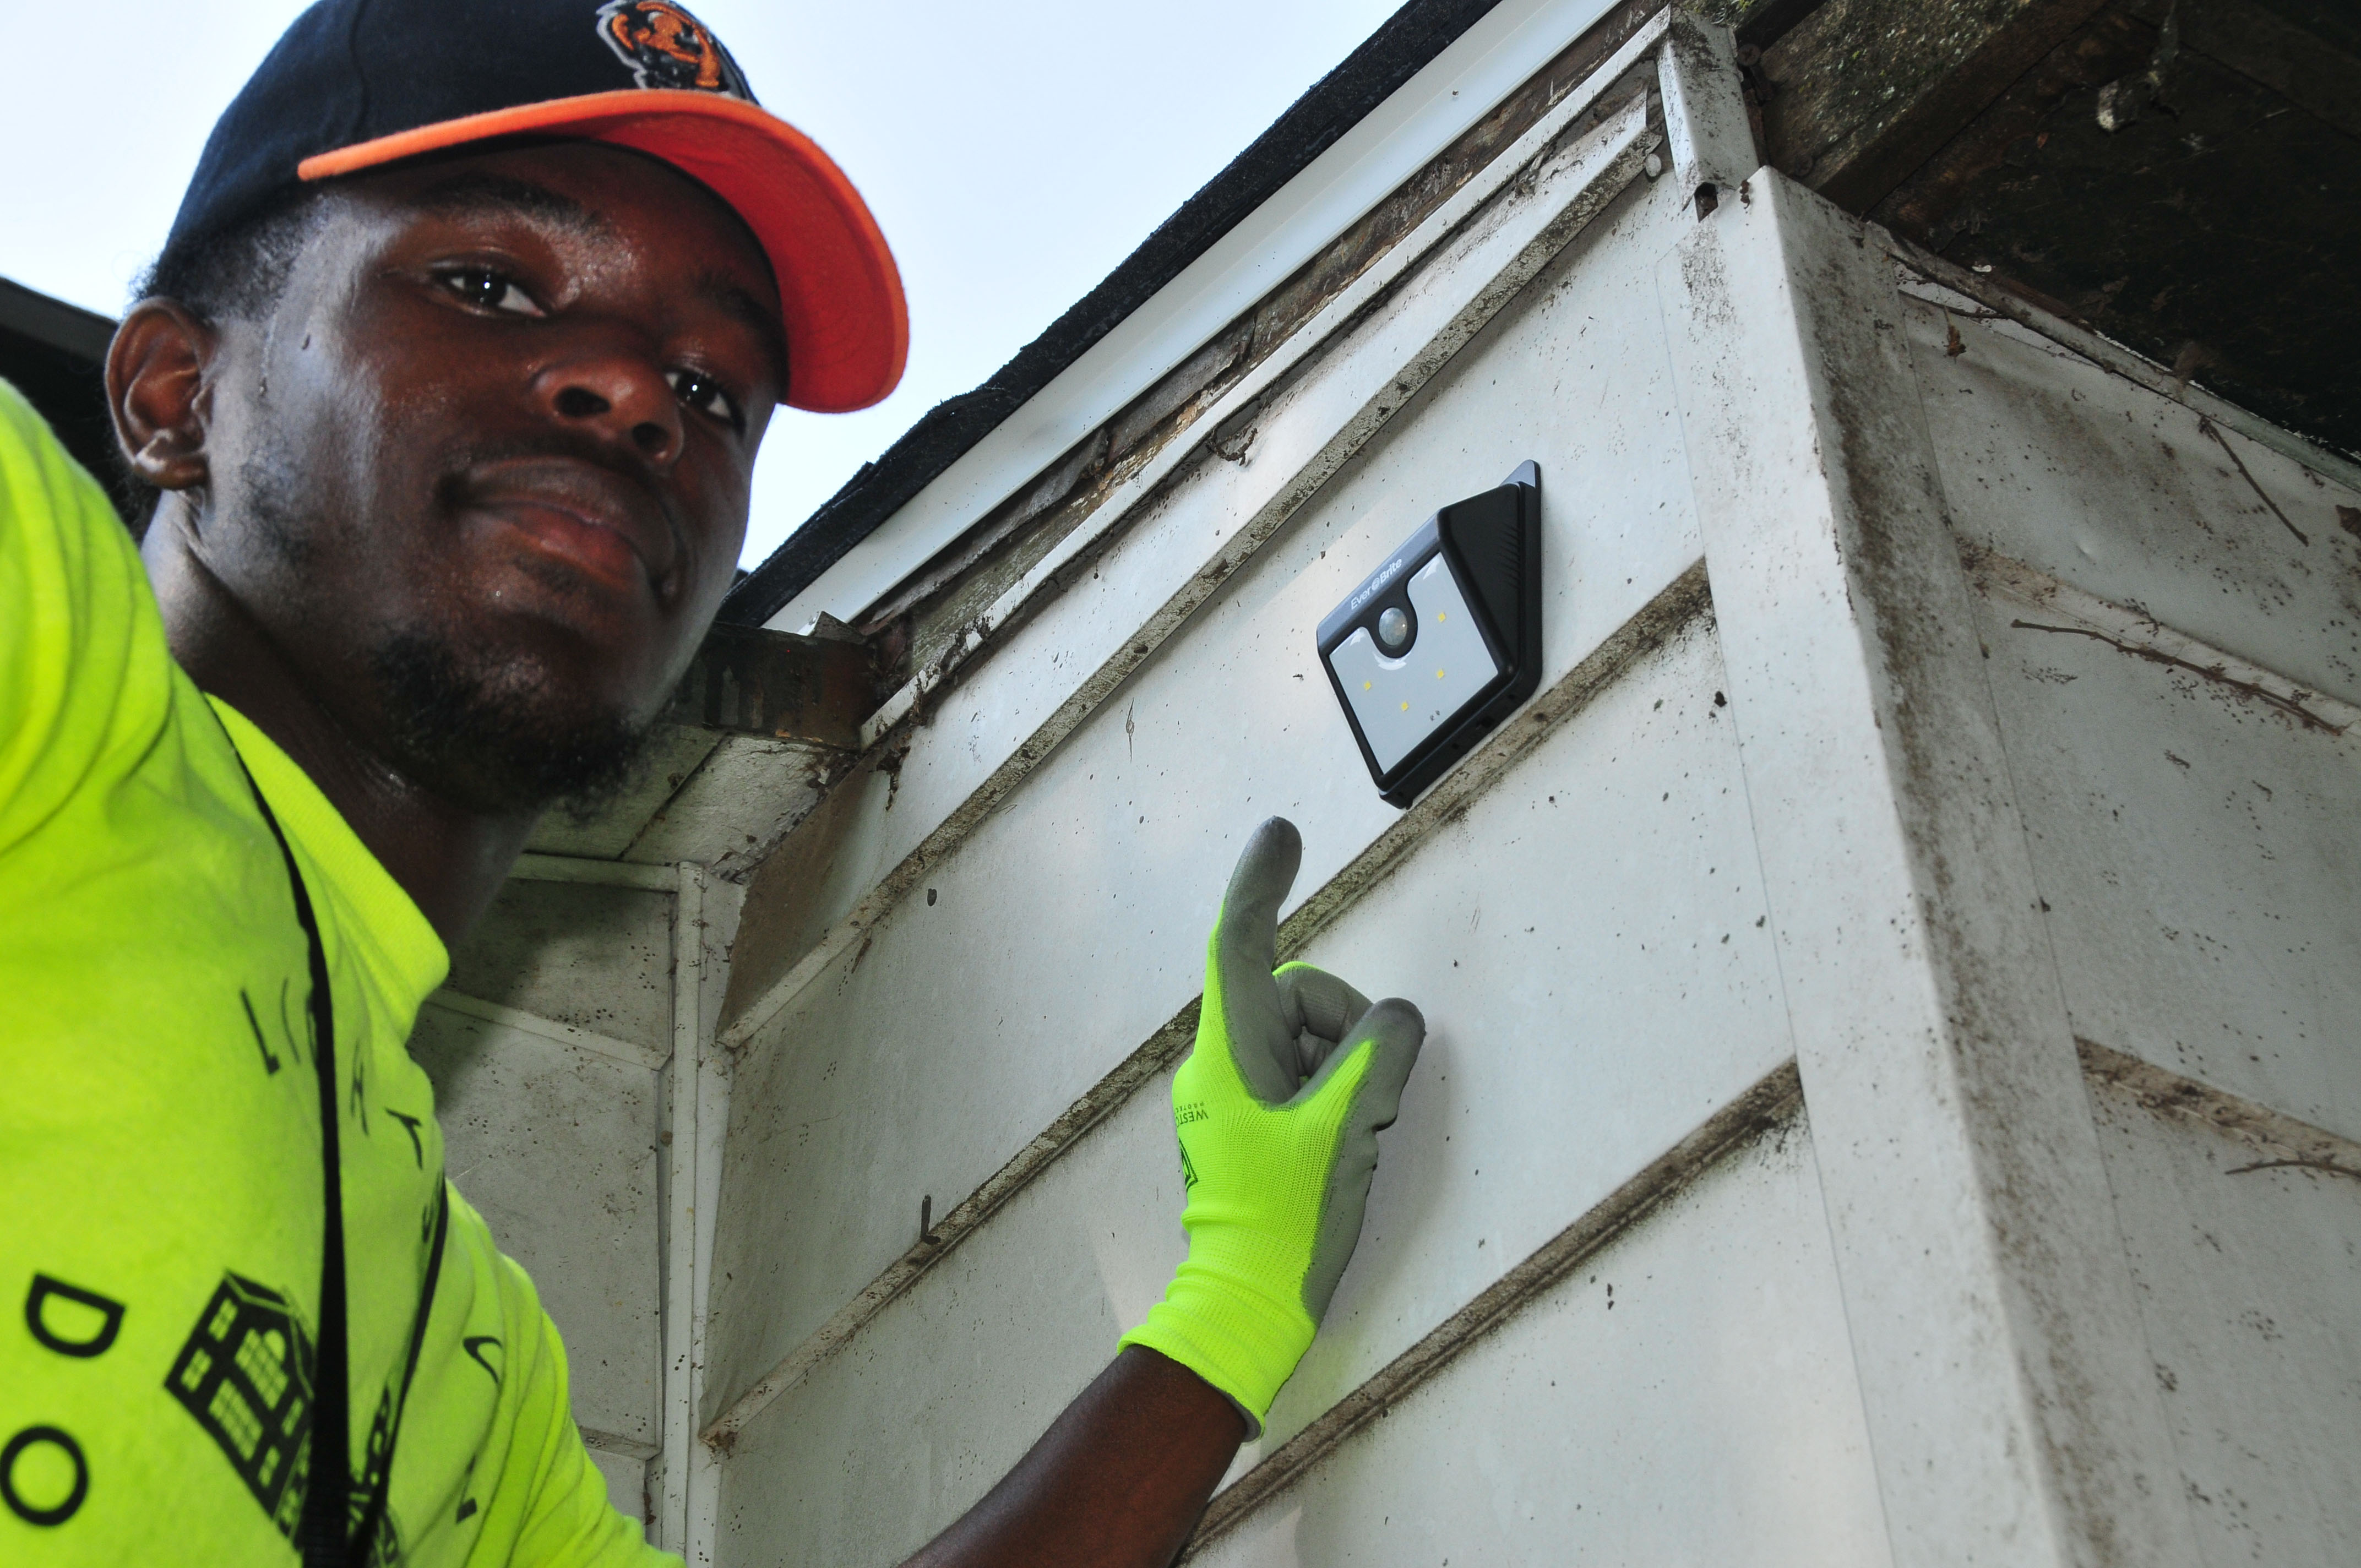 DSU student Eric Wright points to a motion floodlight he just installed at a Dover home.